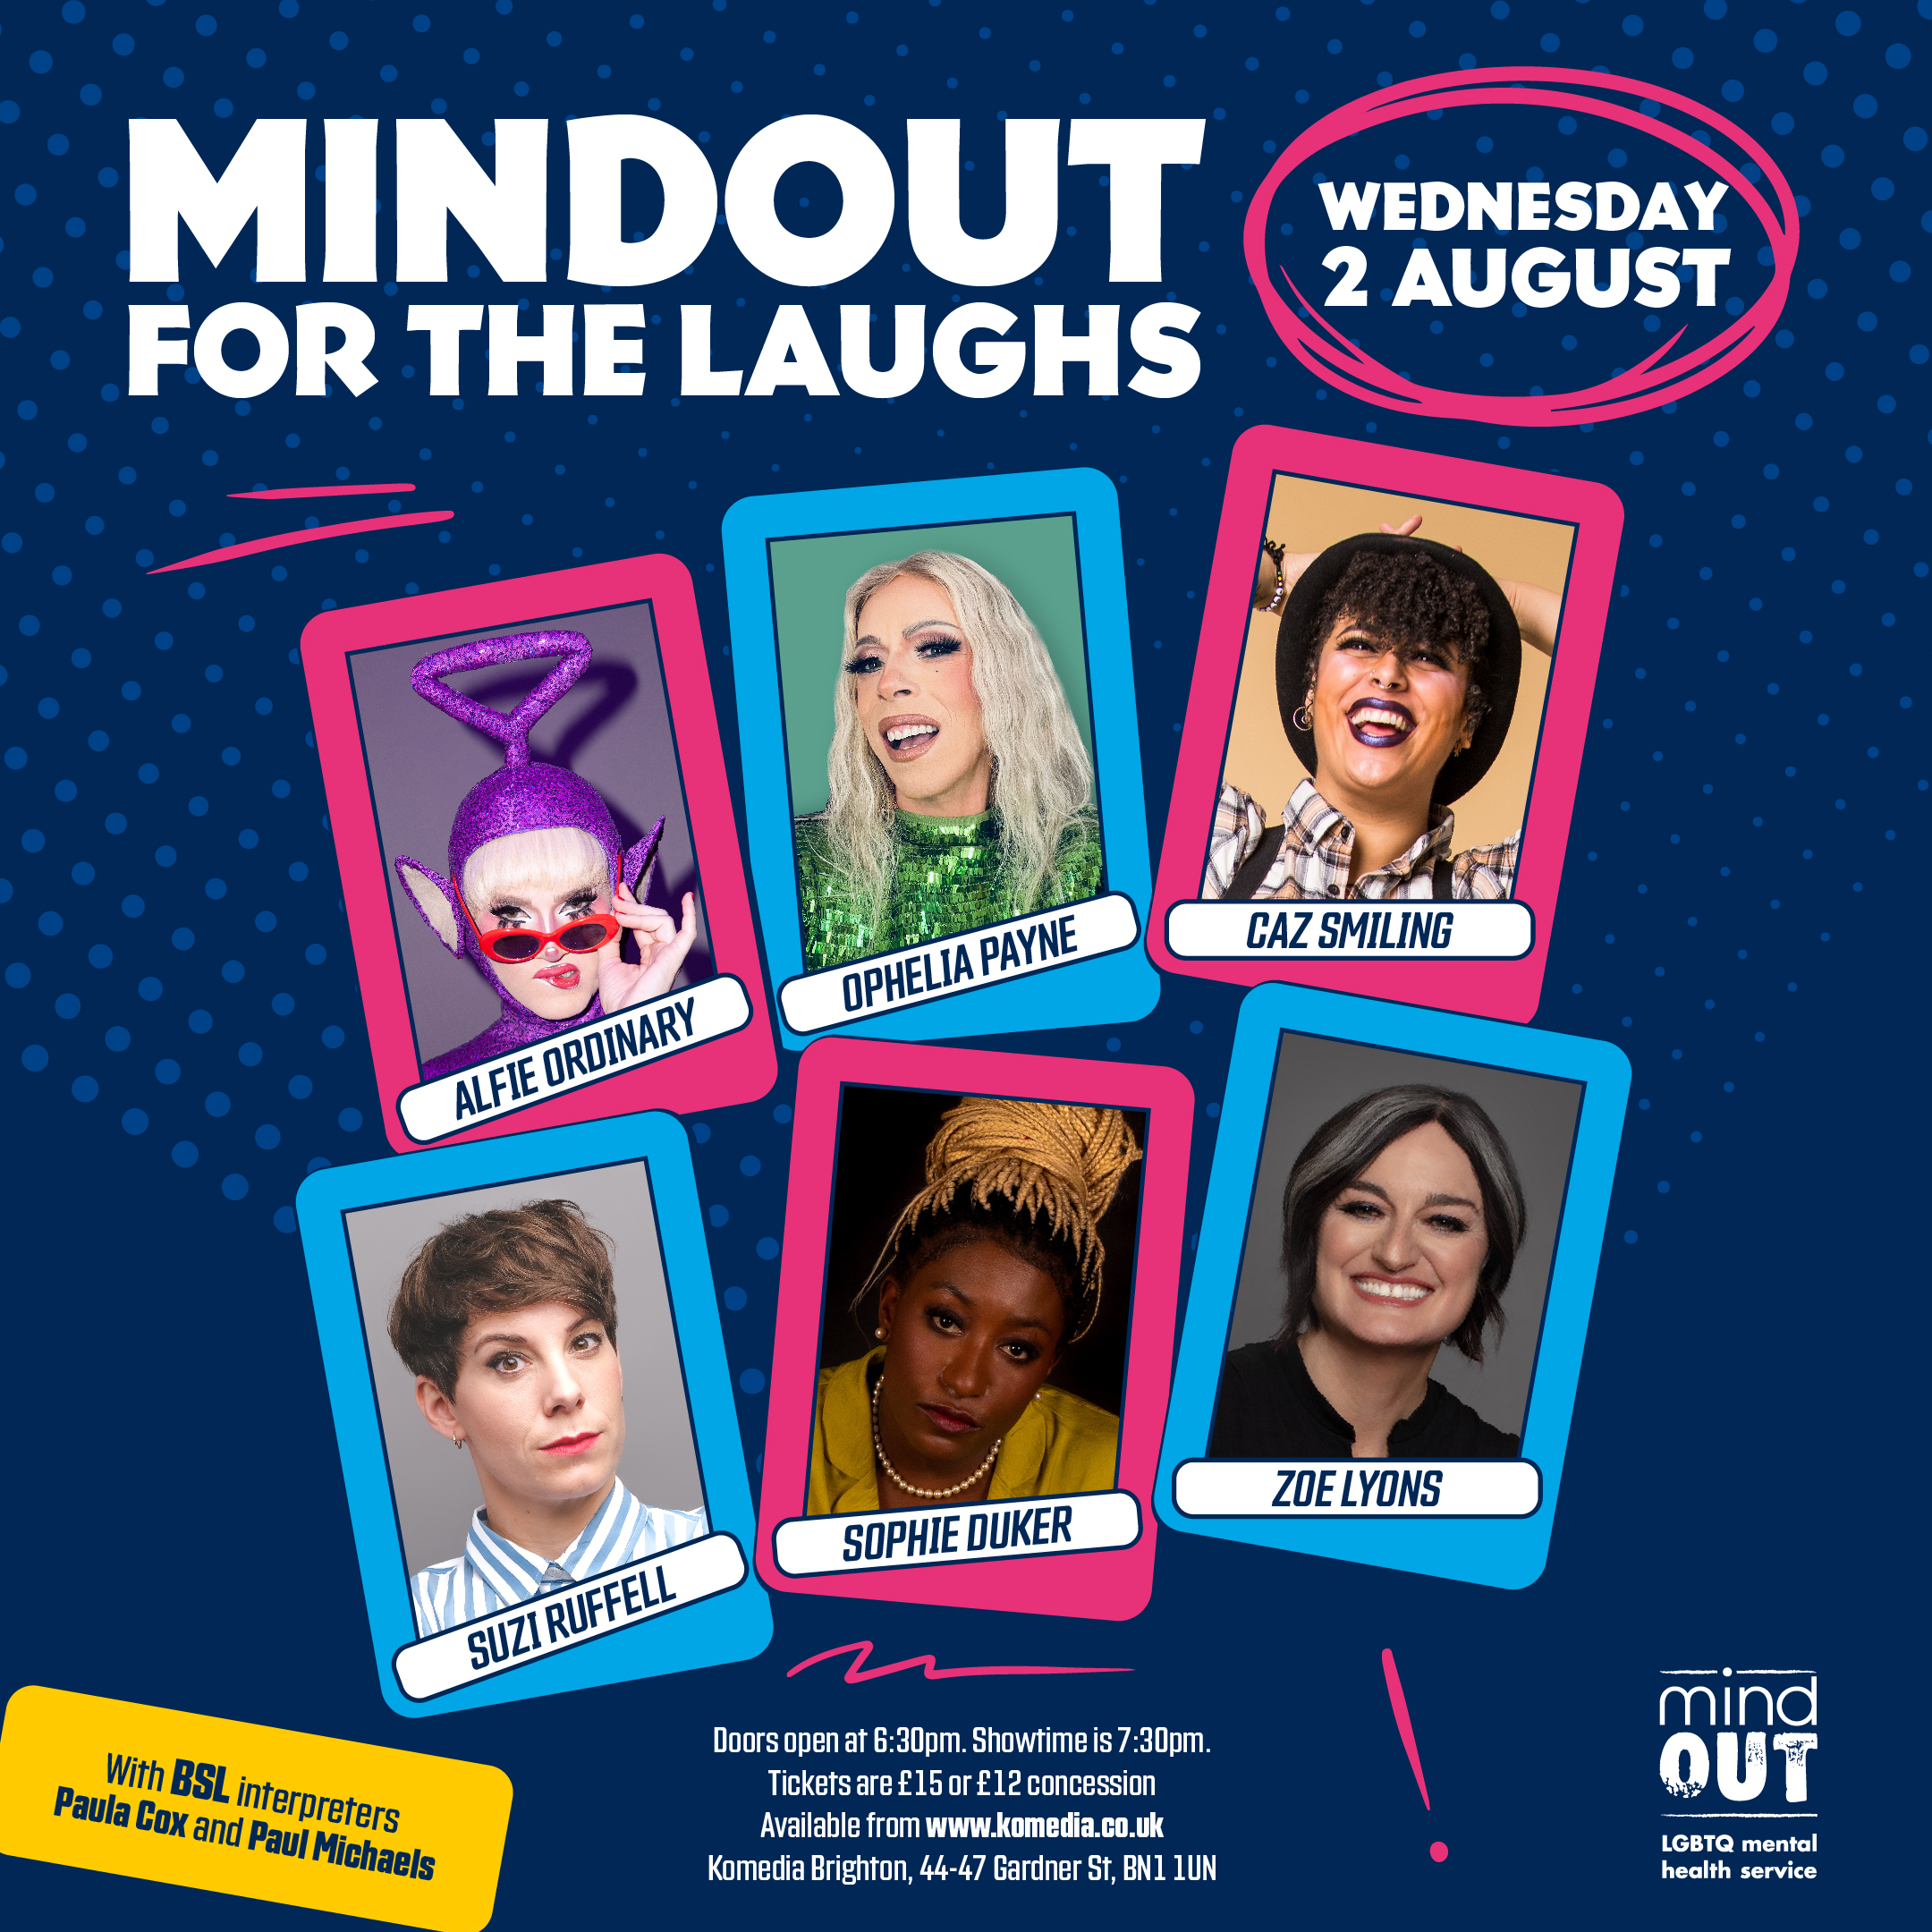 MO4Ls poster with purple background. The poster has four cards picturing Alife Ordinary, Ophelia Payne, Caz Smiling, Suzi Ruffell, and Zoe Lyons.